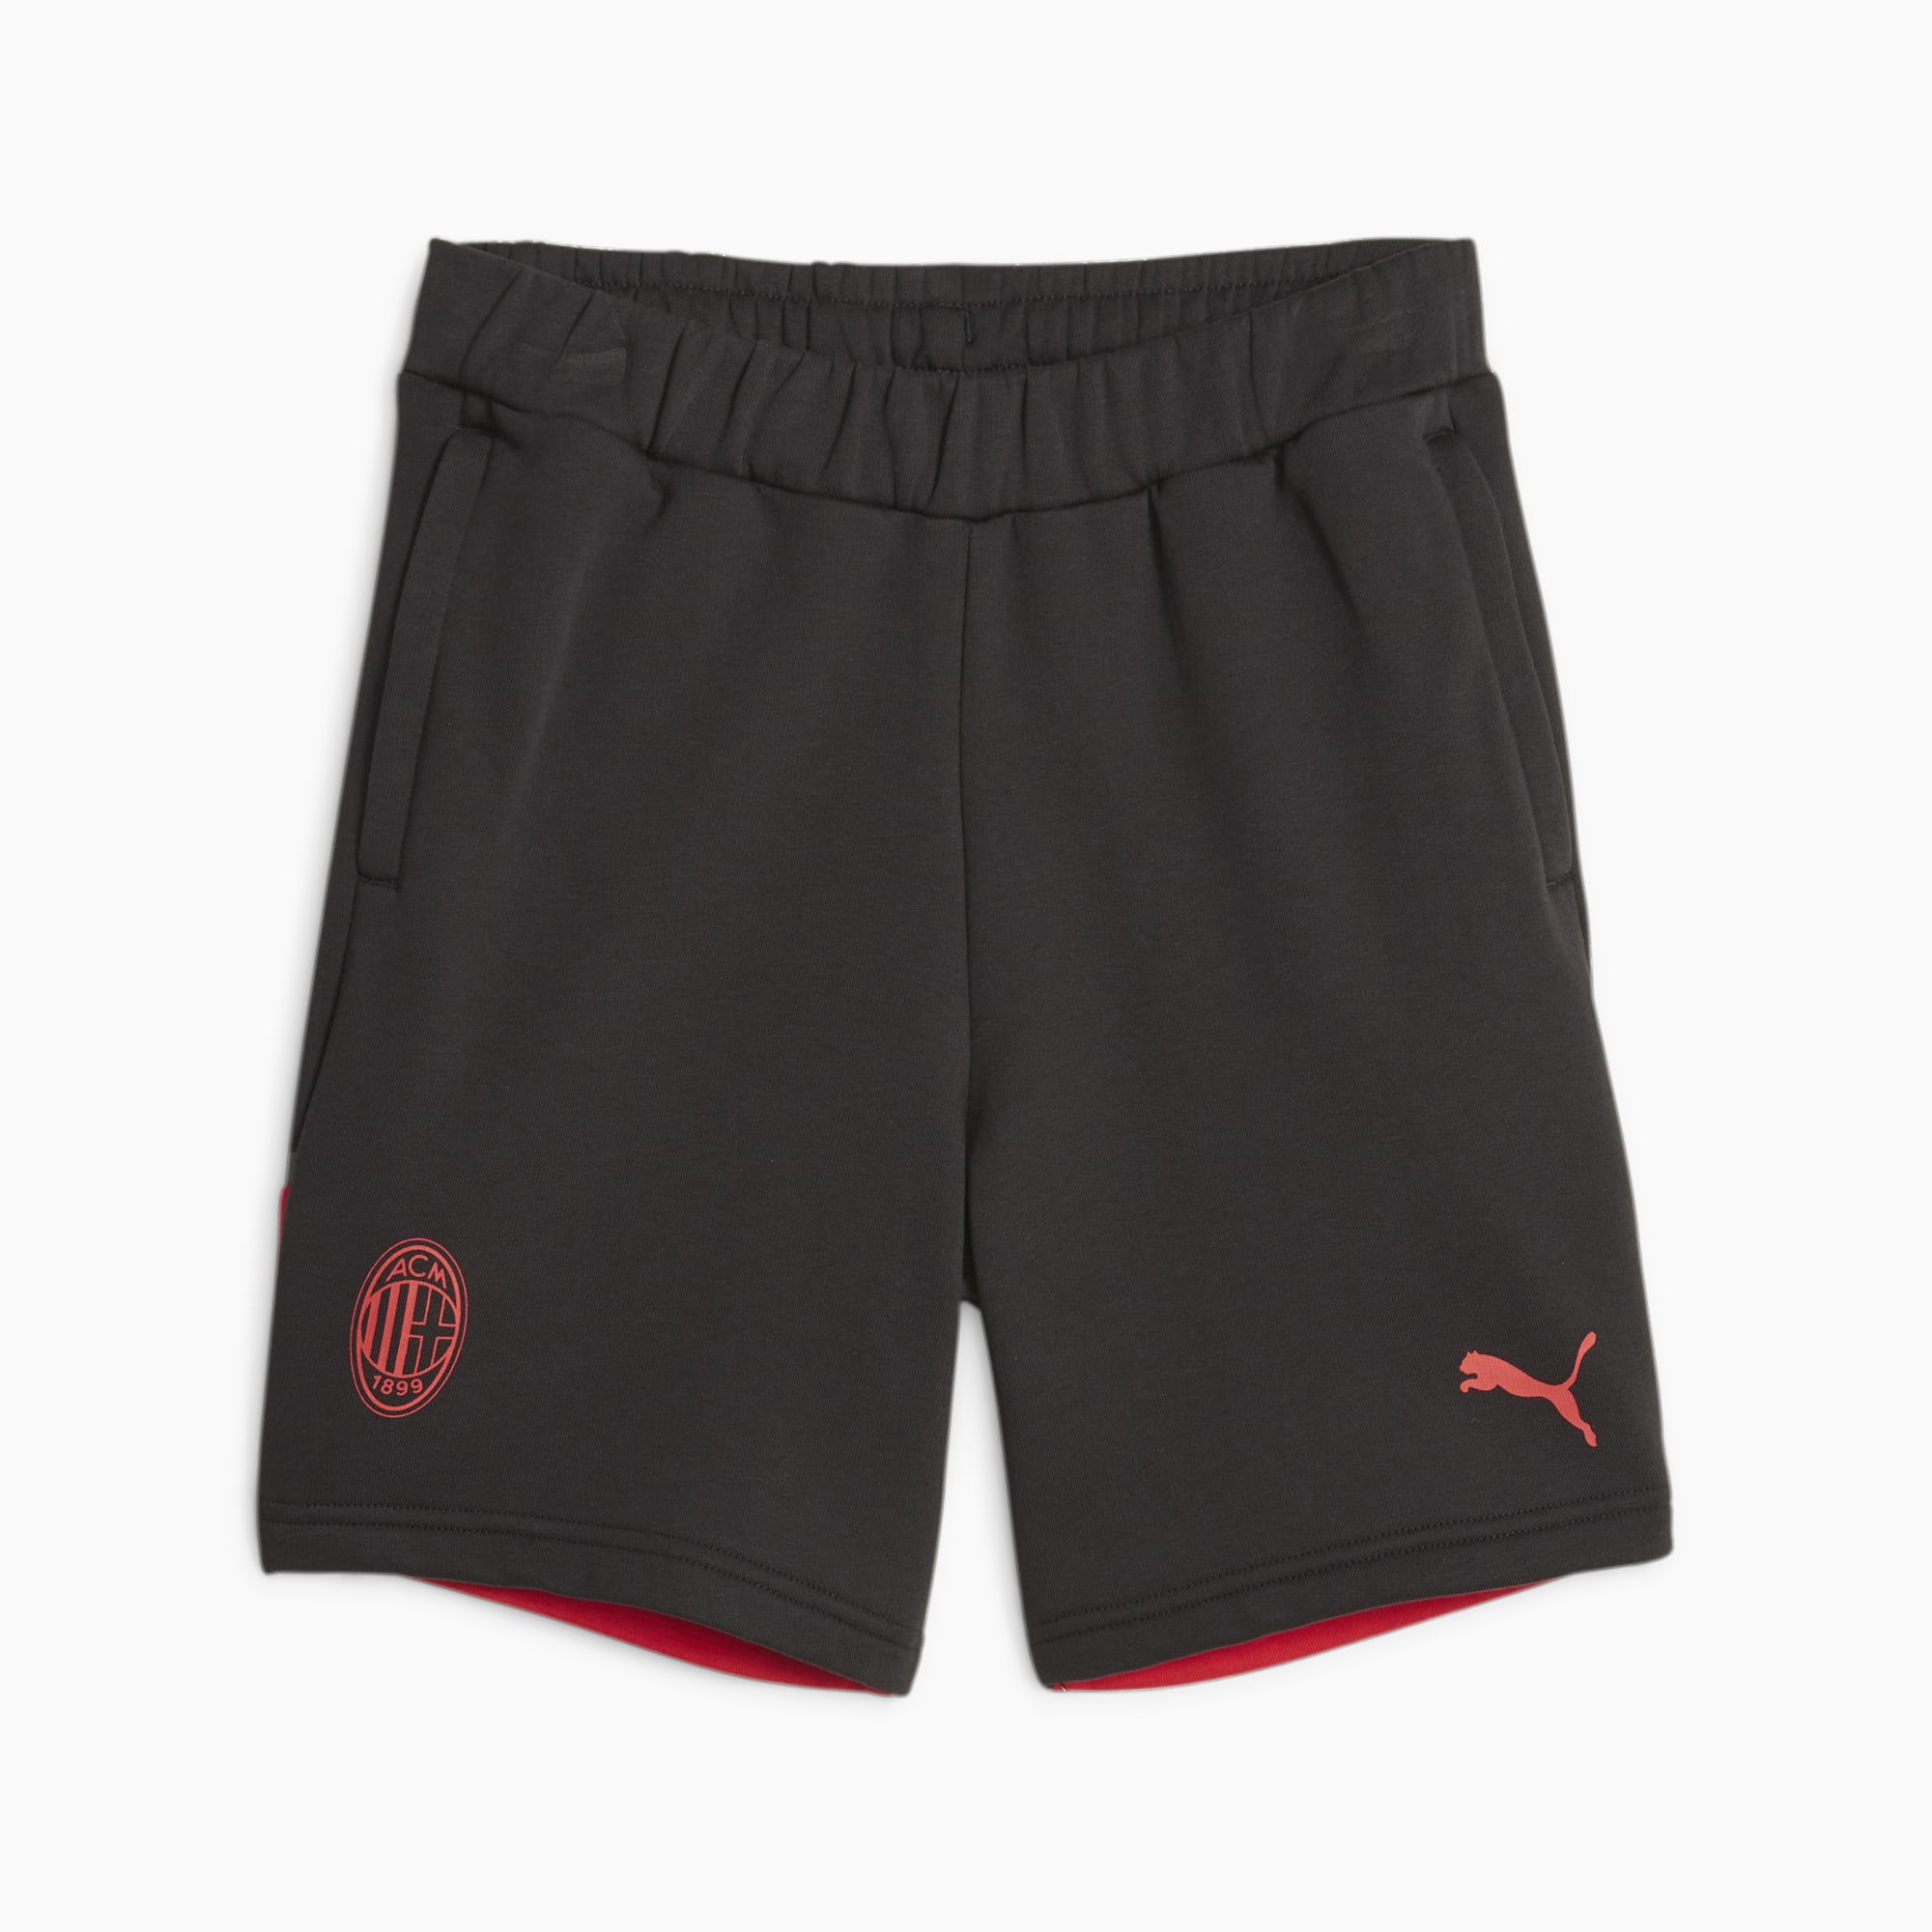 PUMA AC Milan Football Casuals Youth Shorts, Black/For All Time Red, Size 110, Clothing